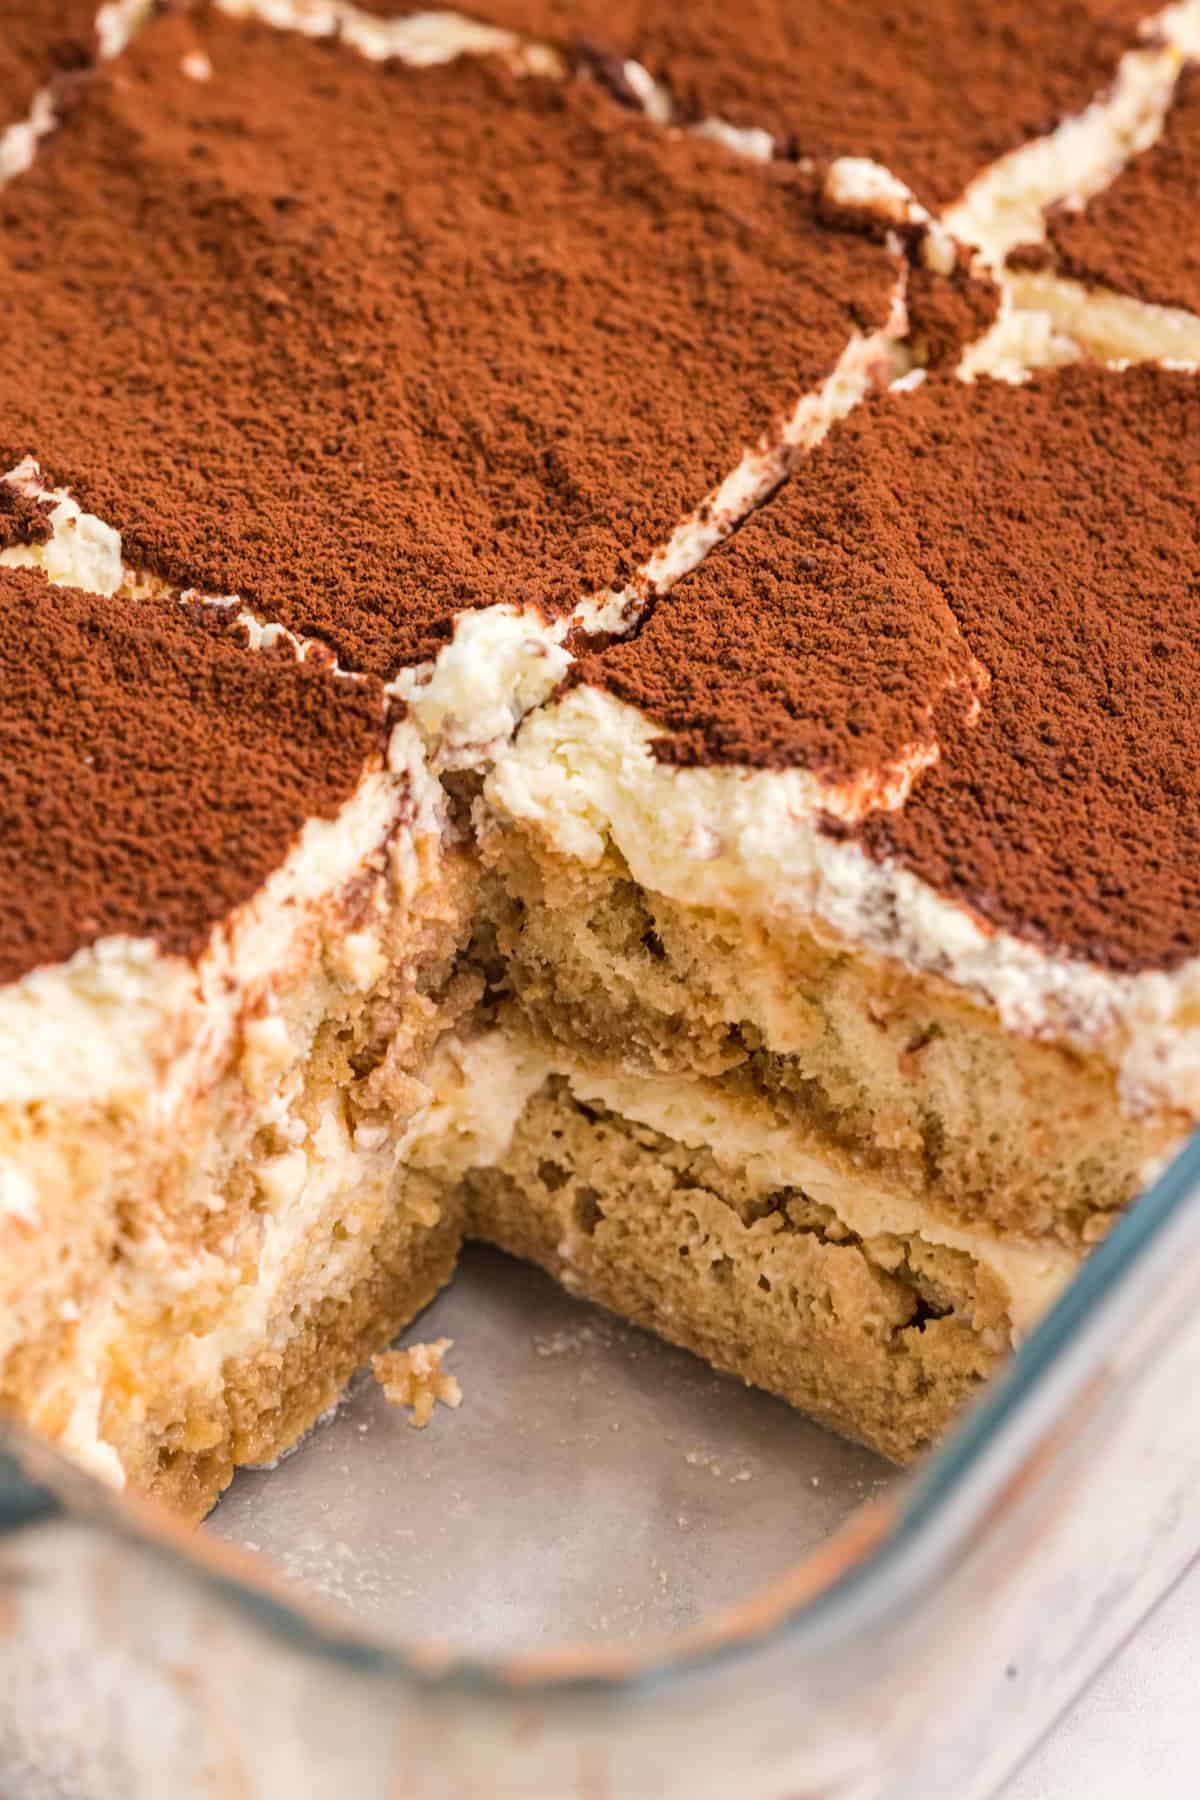 Tiramisu has been sliced into several pieces in a baking dish.